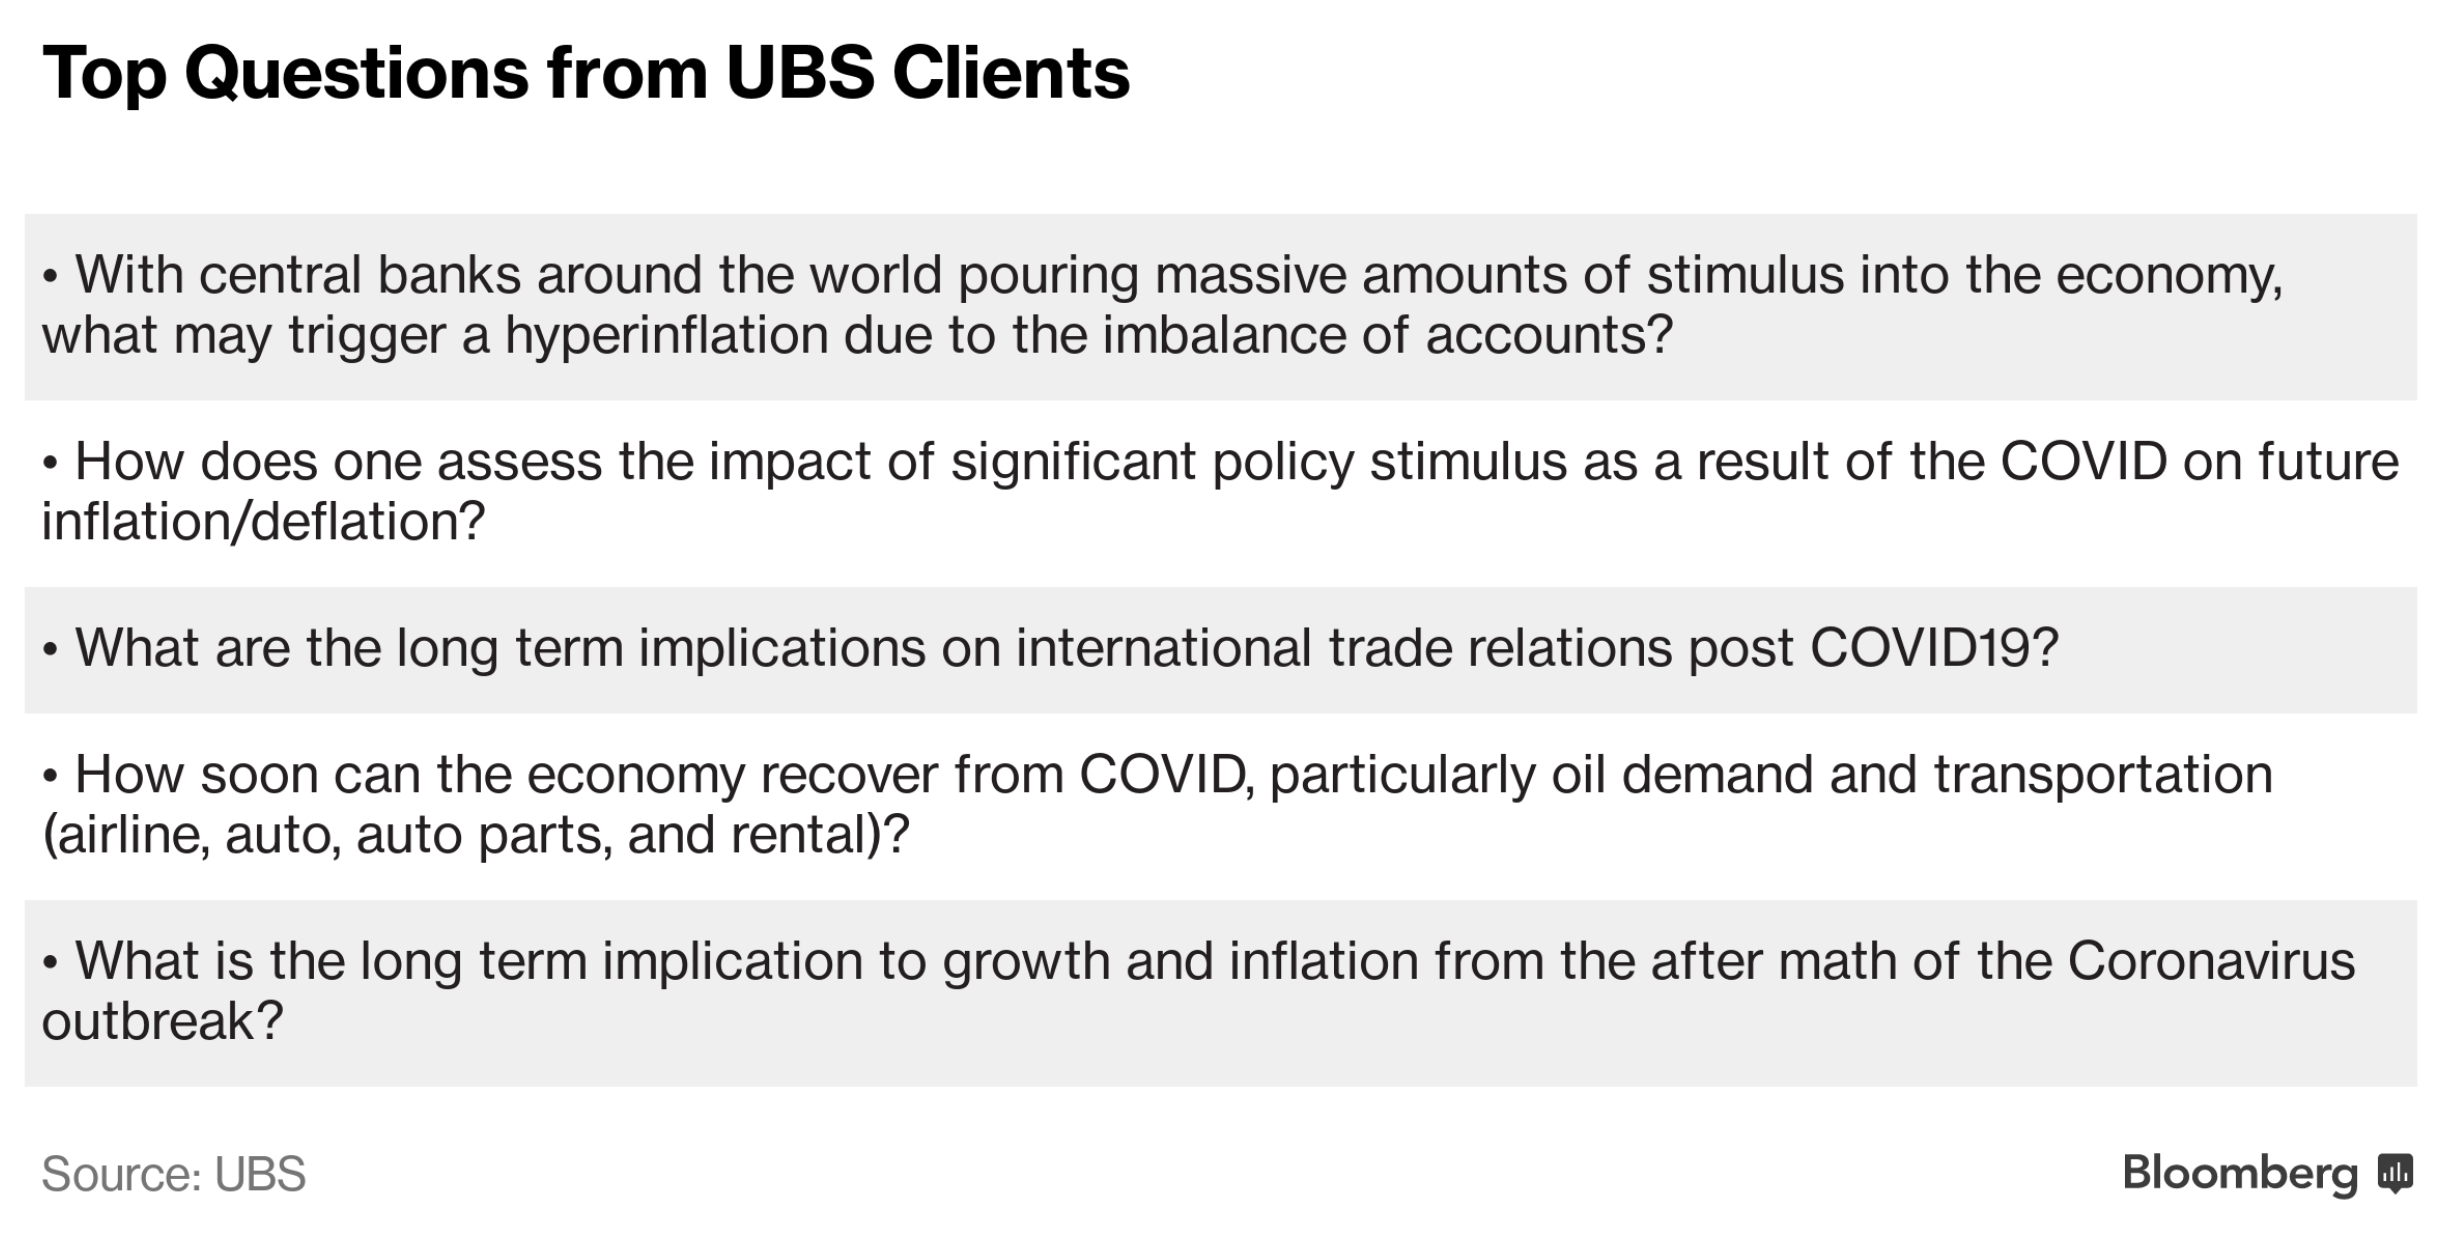 Hyperinflation Concerns Top The Worry List For UBS Clients